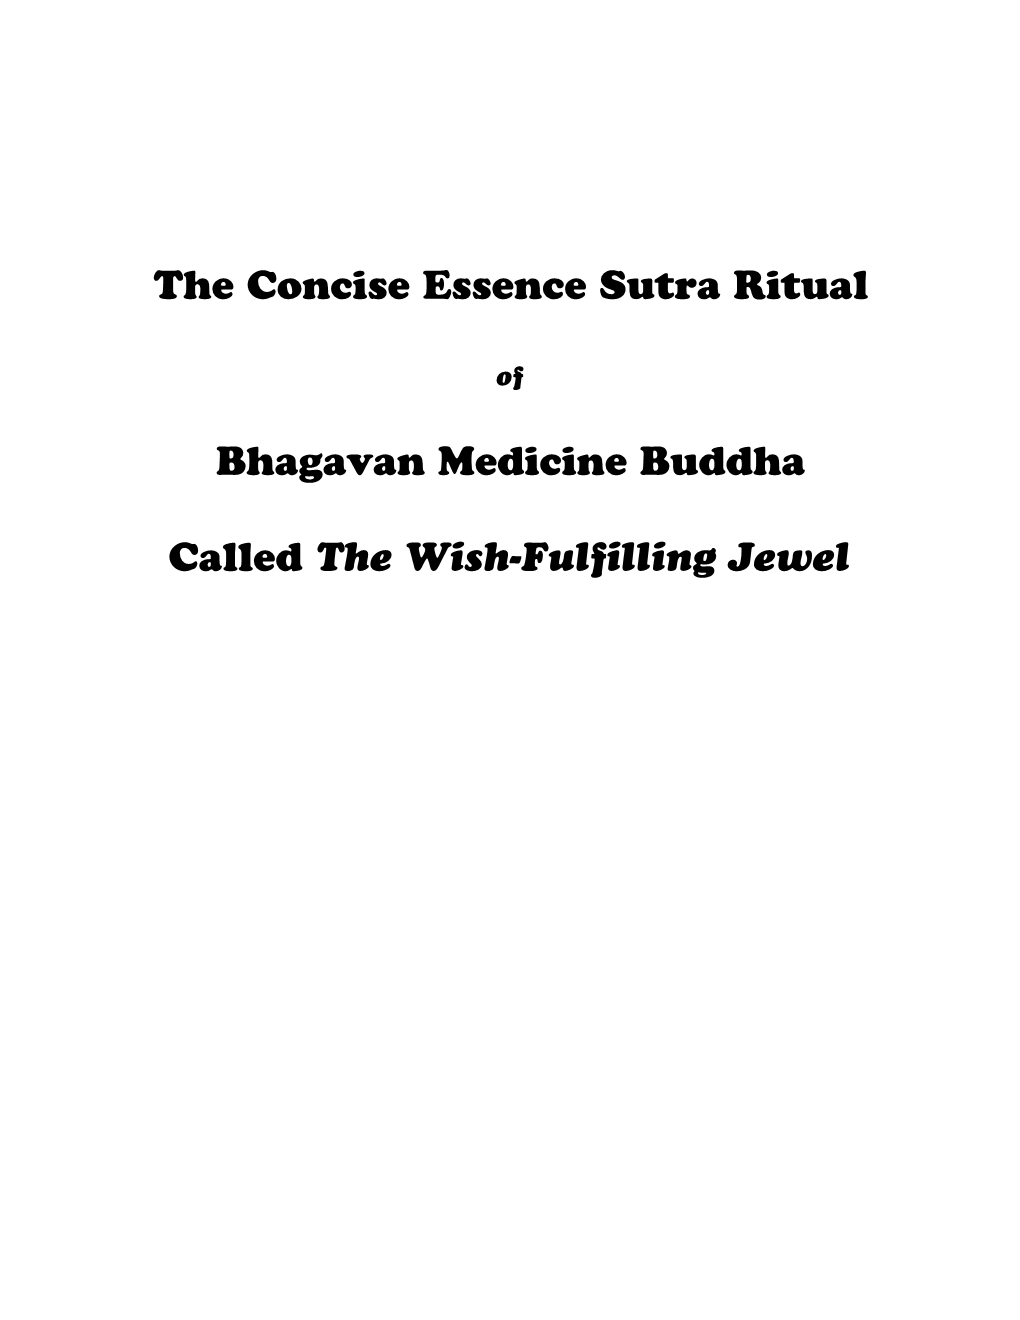 Concise Essence Sutra Ritual